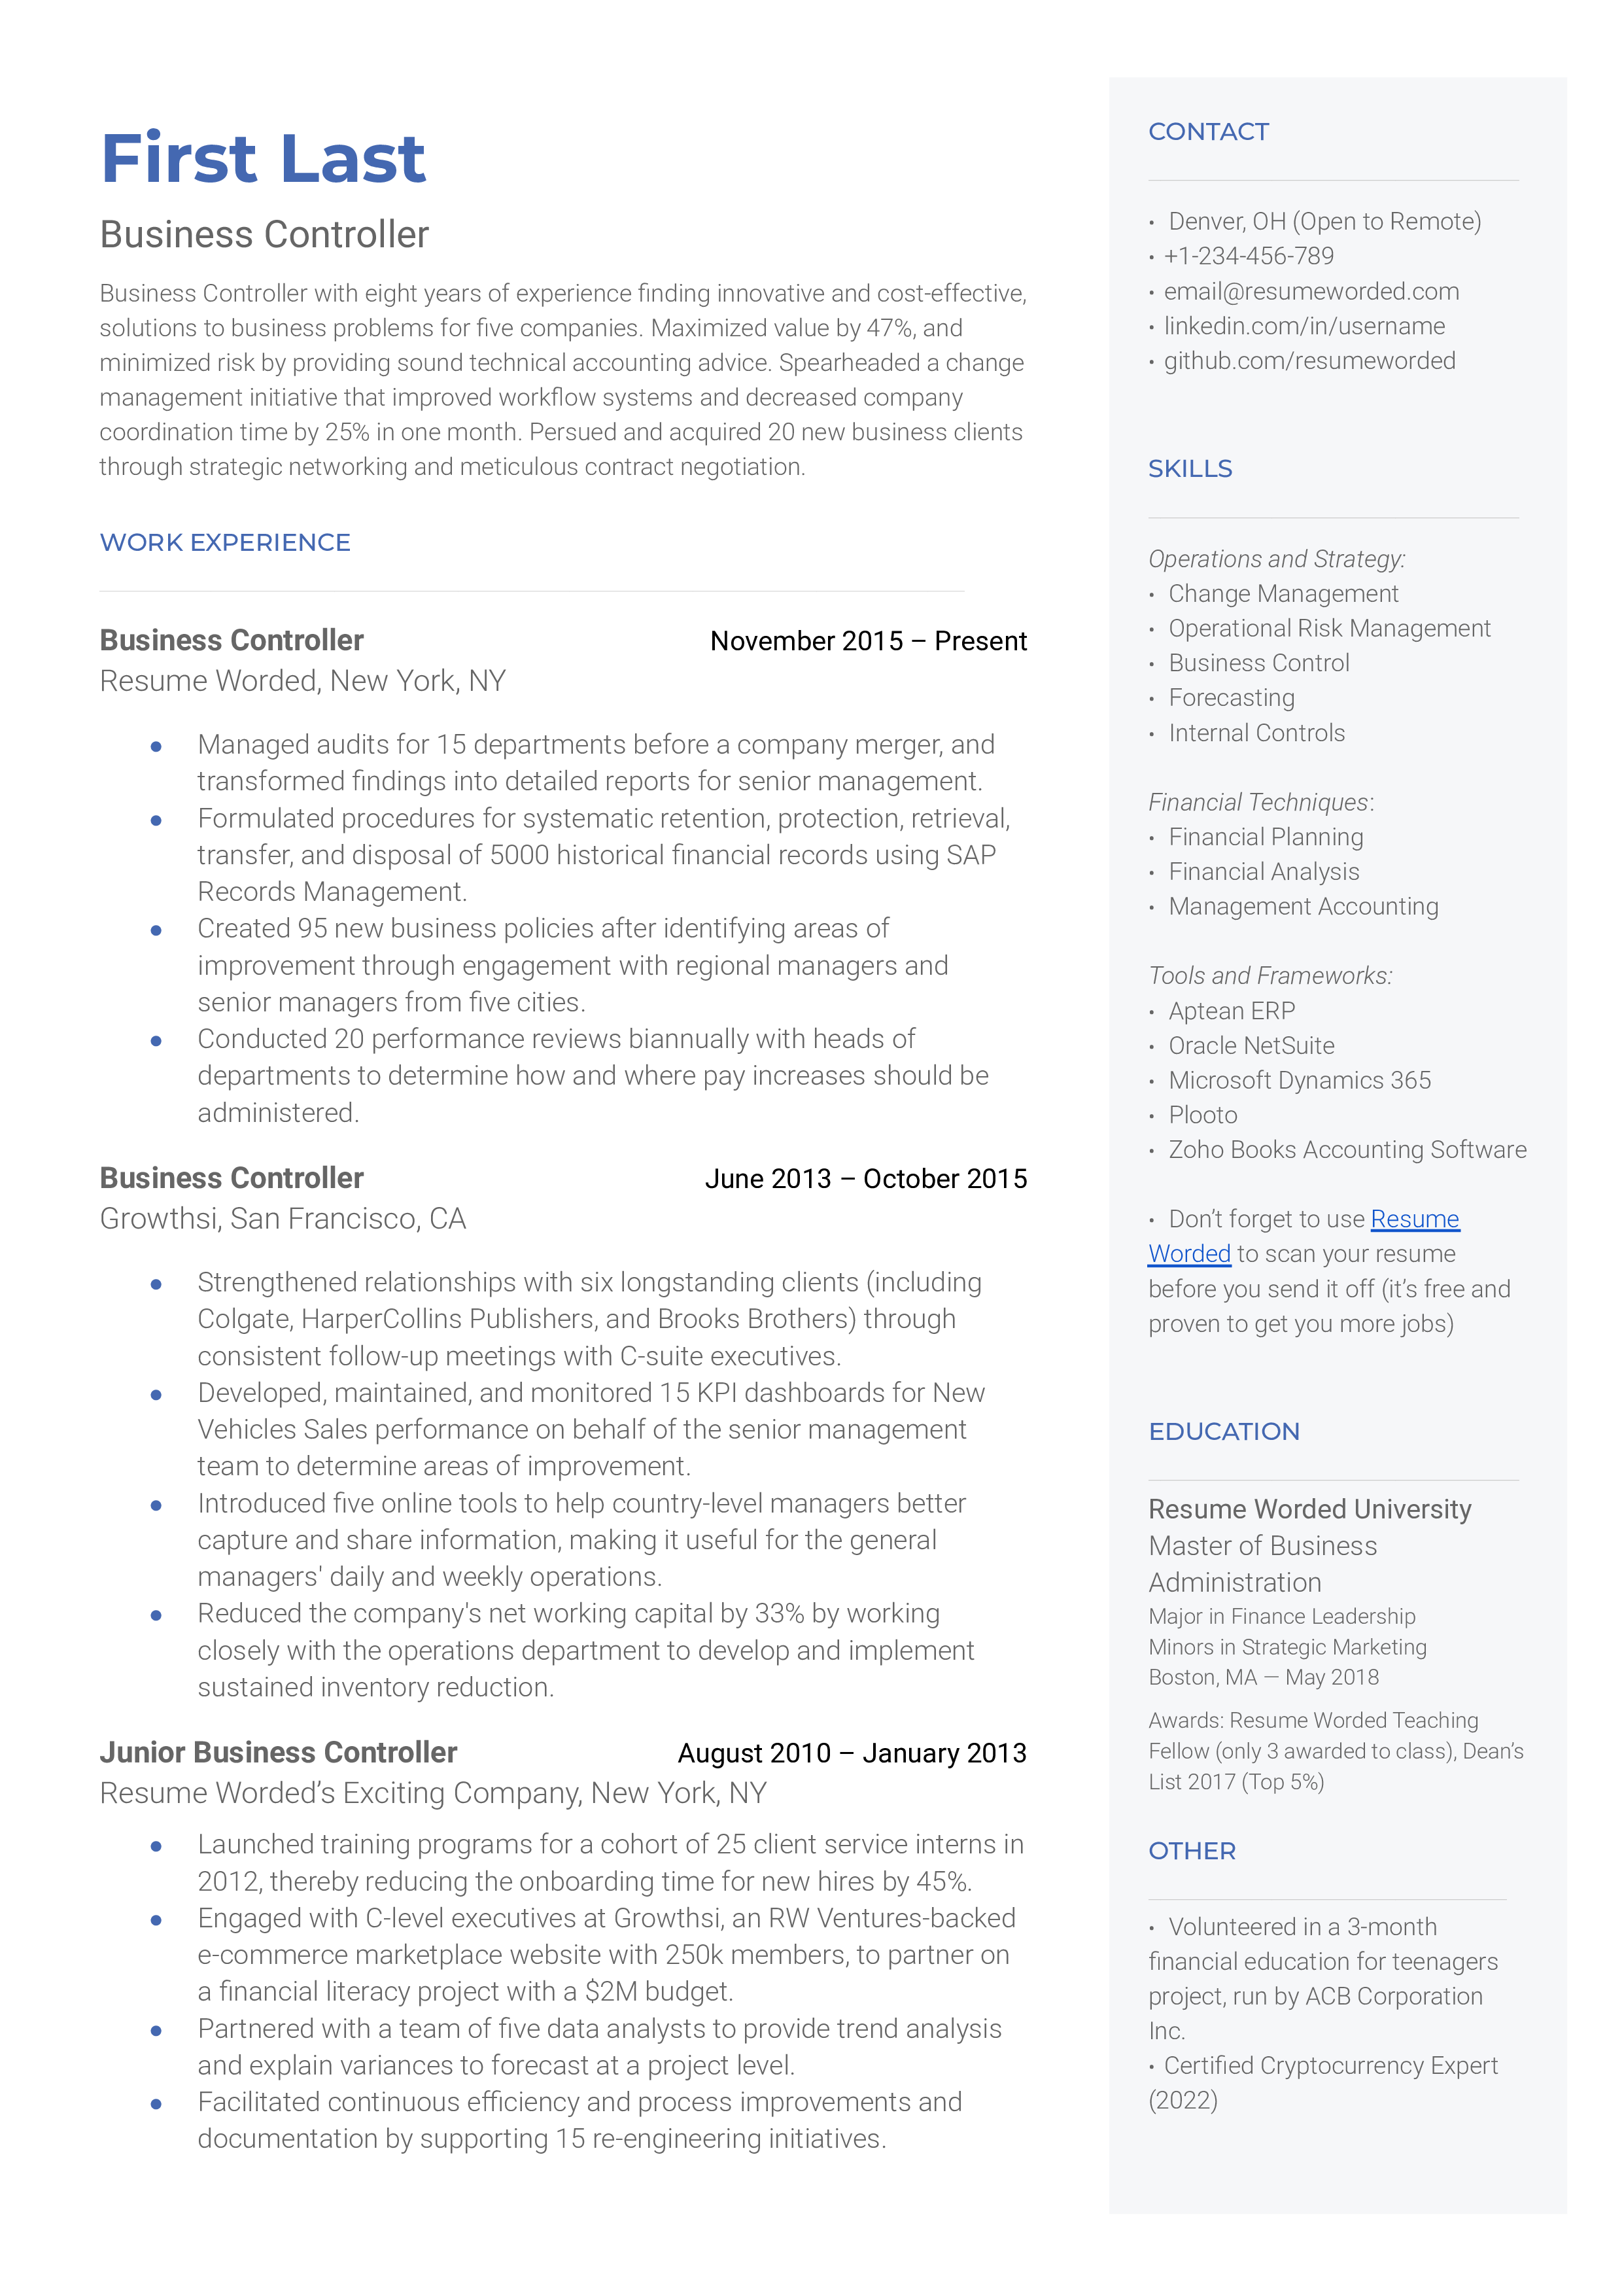 Business Controller Resume Template + Example